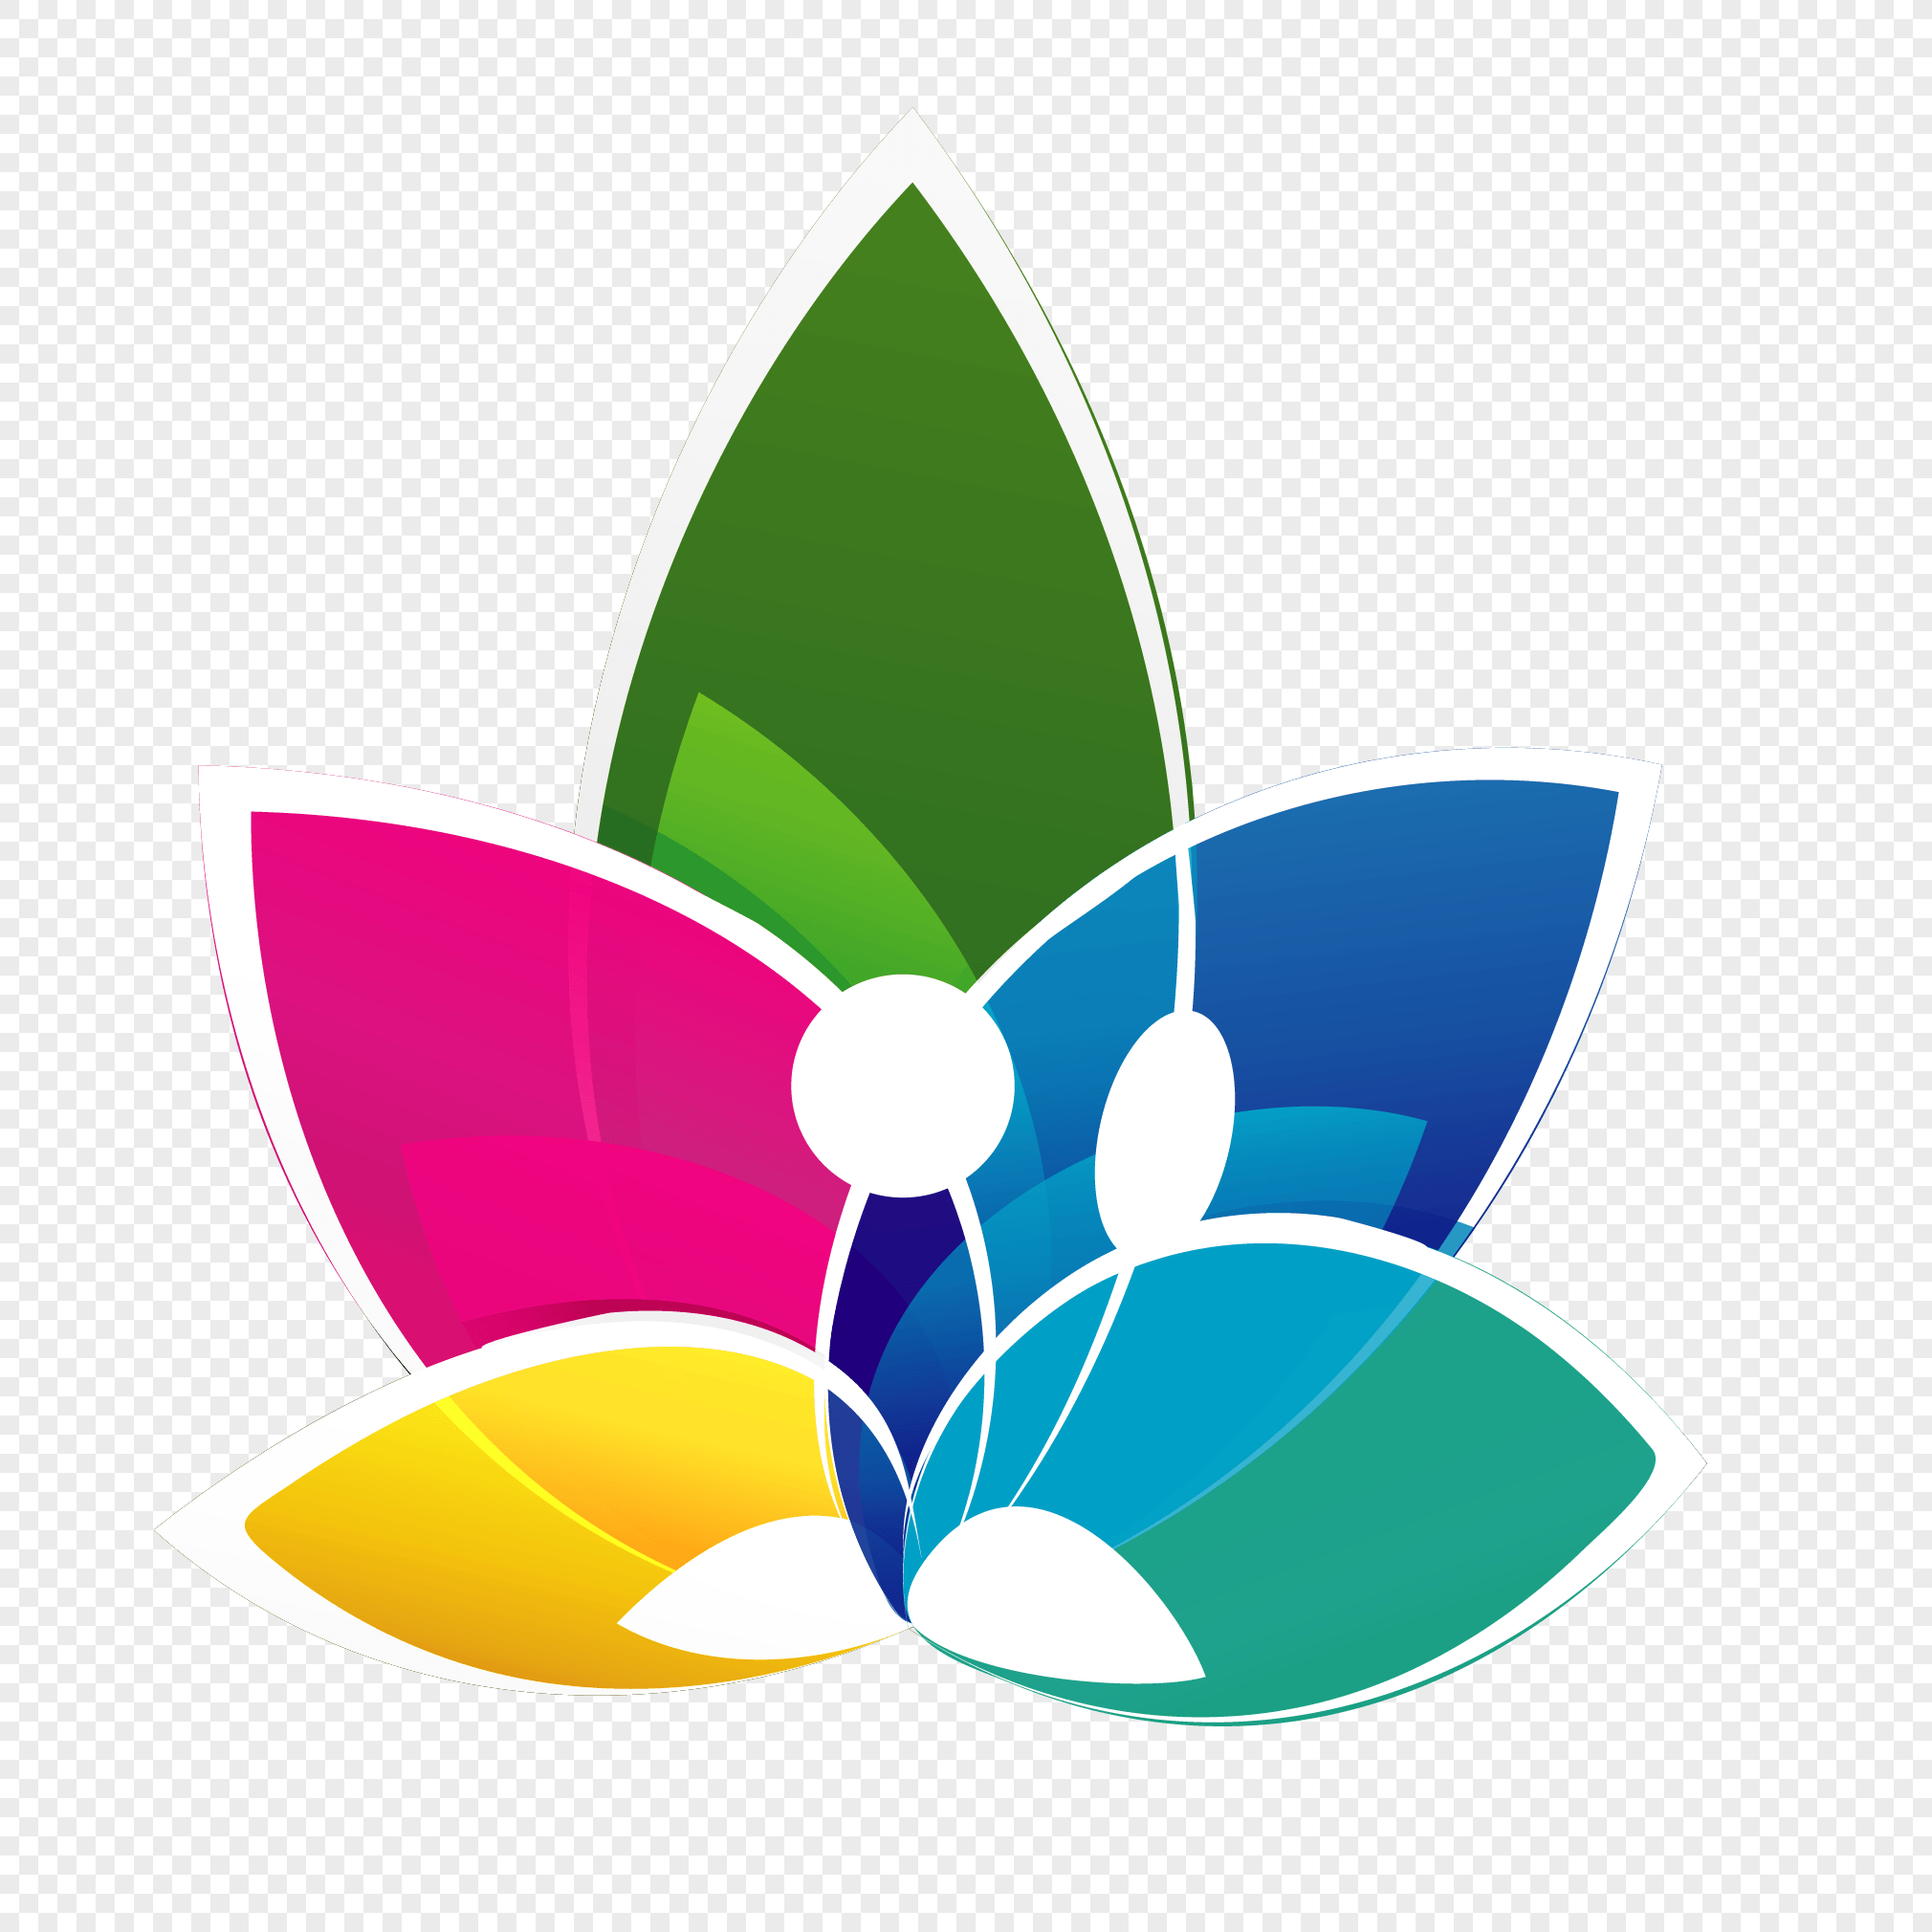 Dream Flower Logo - Dream flower icon png image_picture free download 400797735_lovepik.com